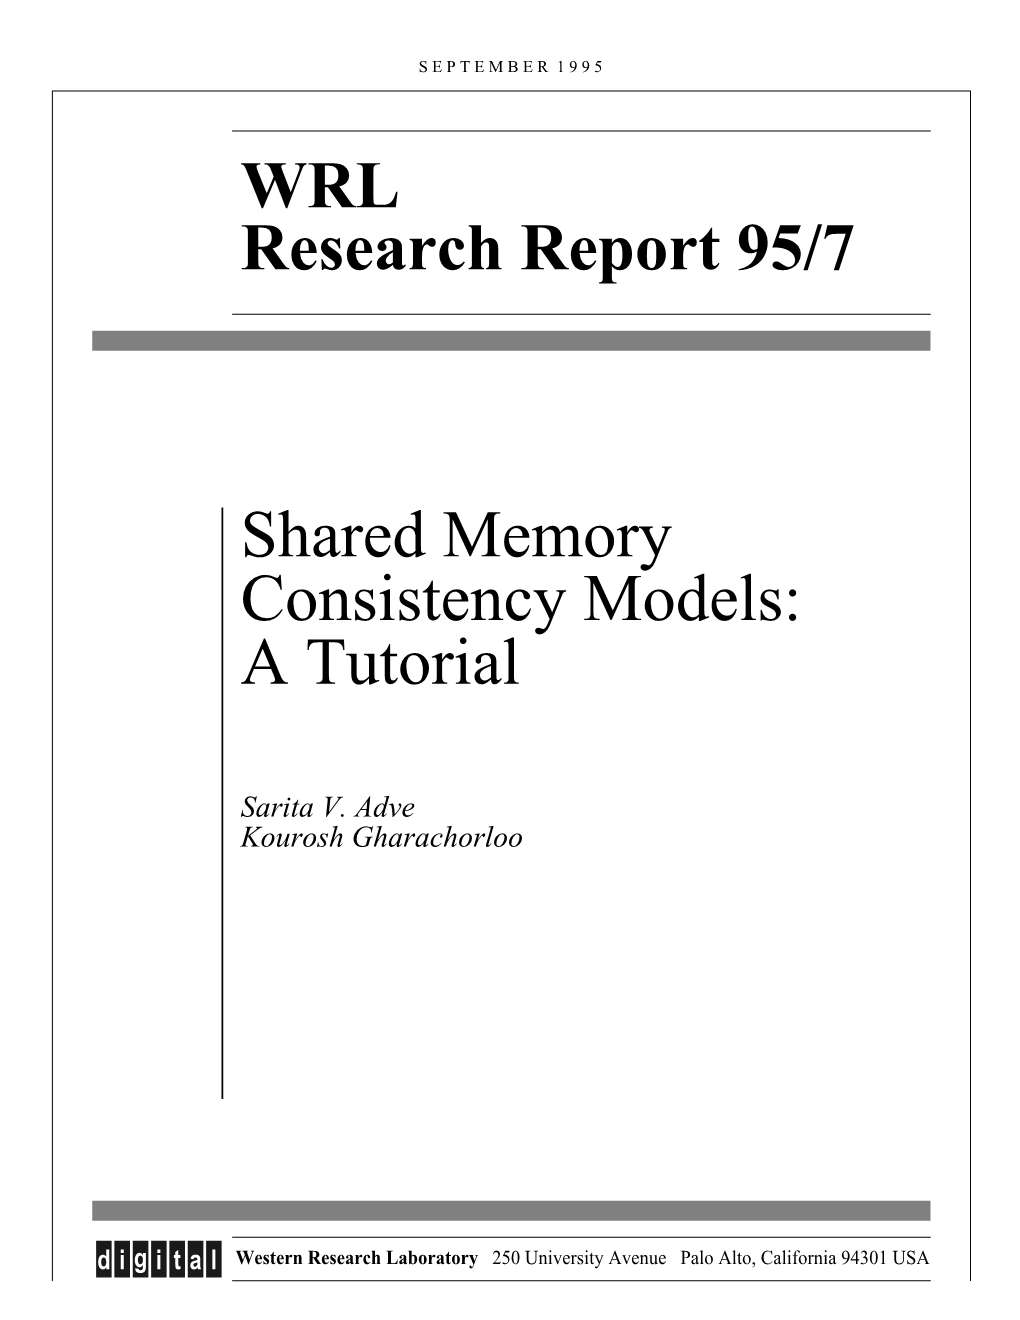 Shared Memory Consistency Models: a Tutorial